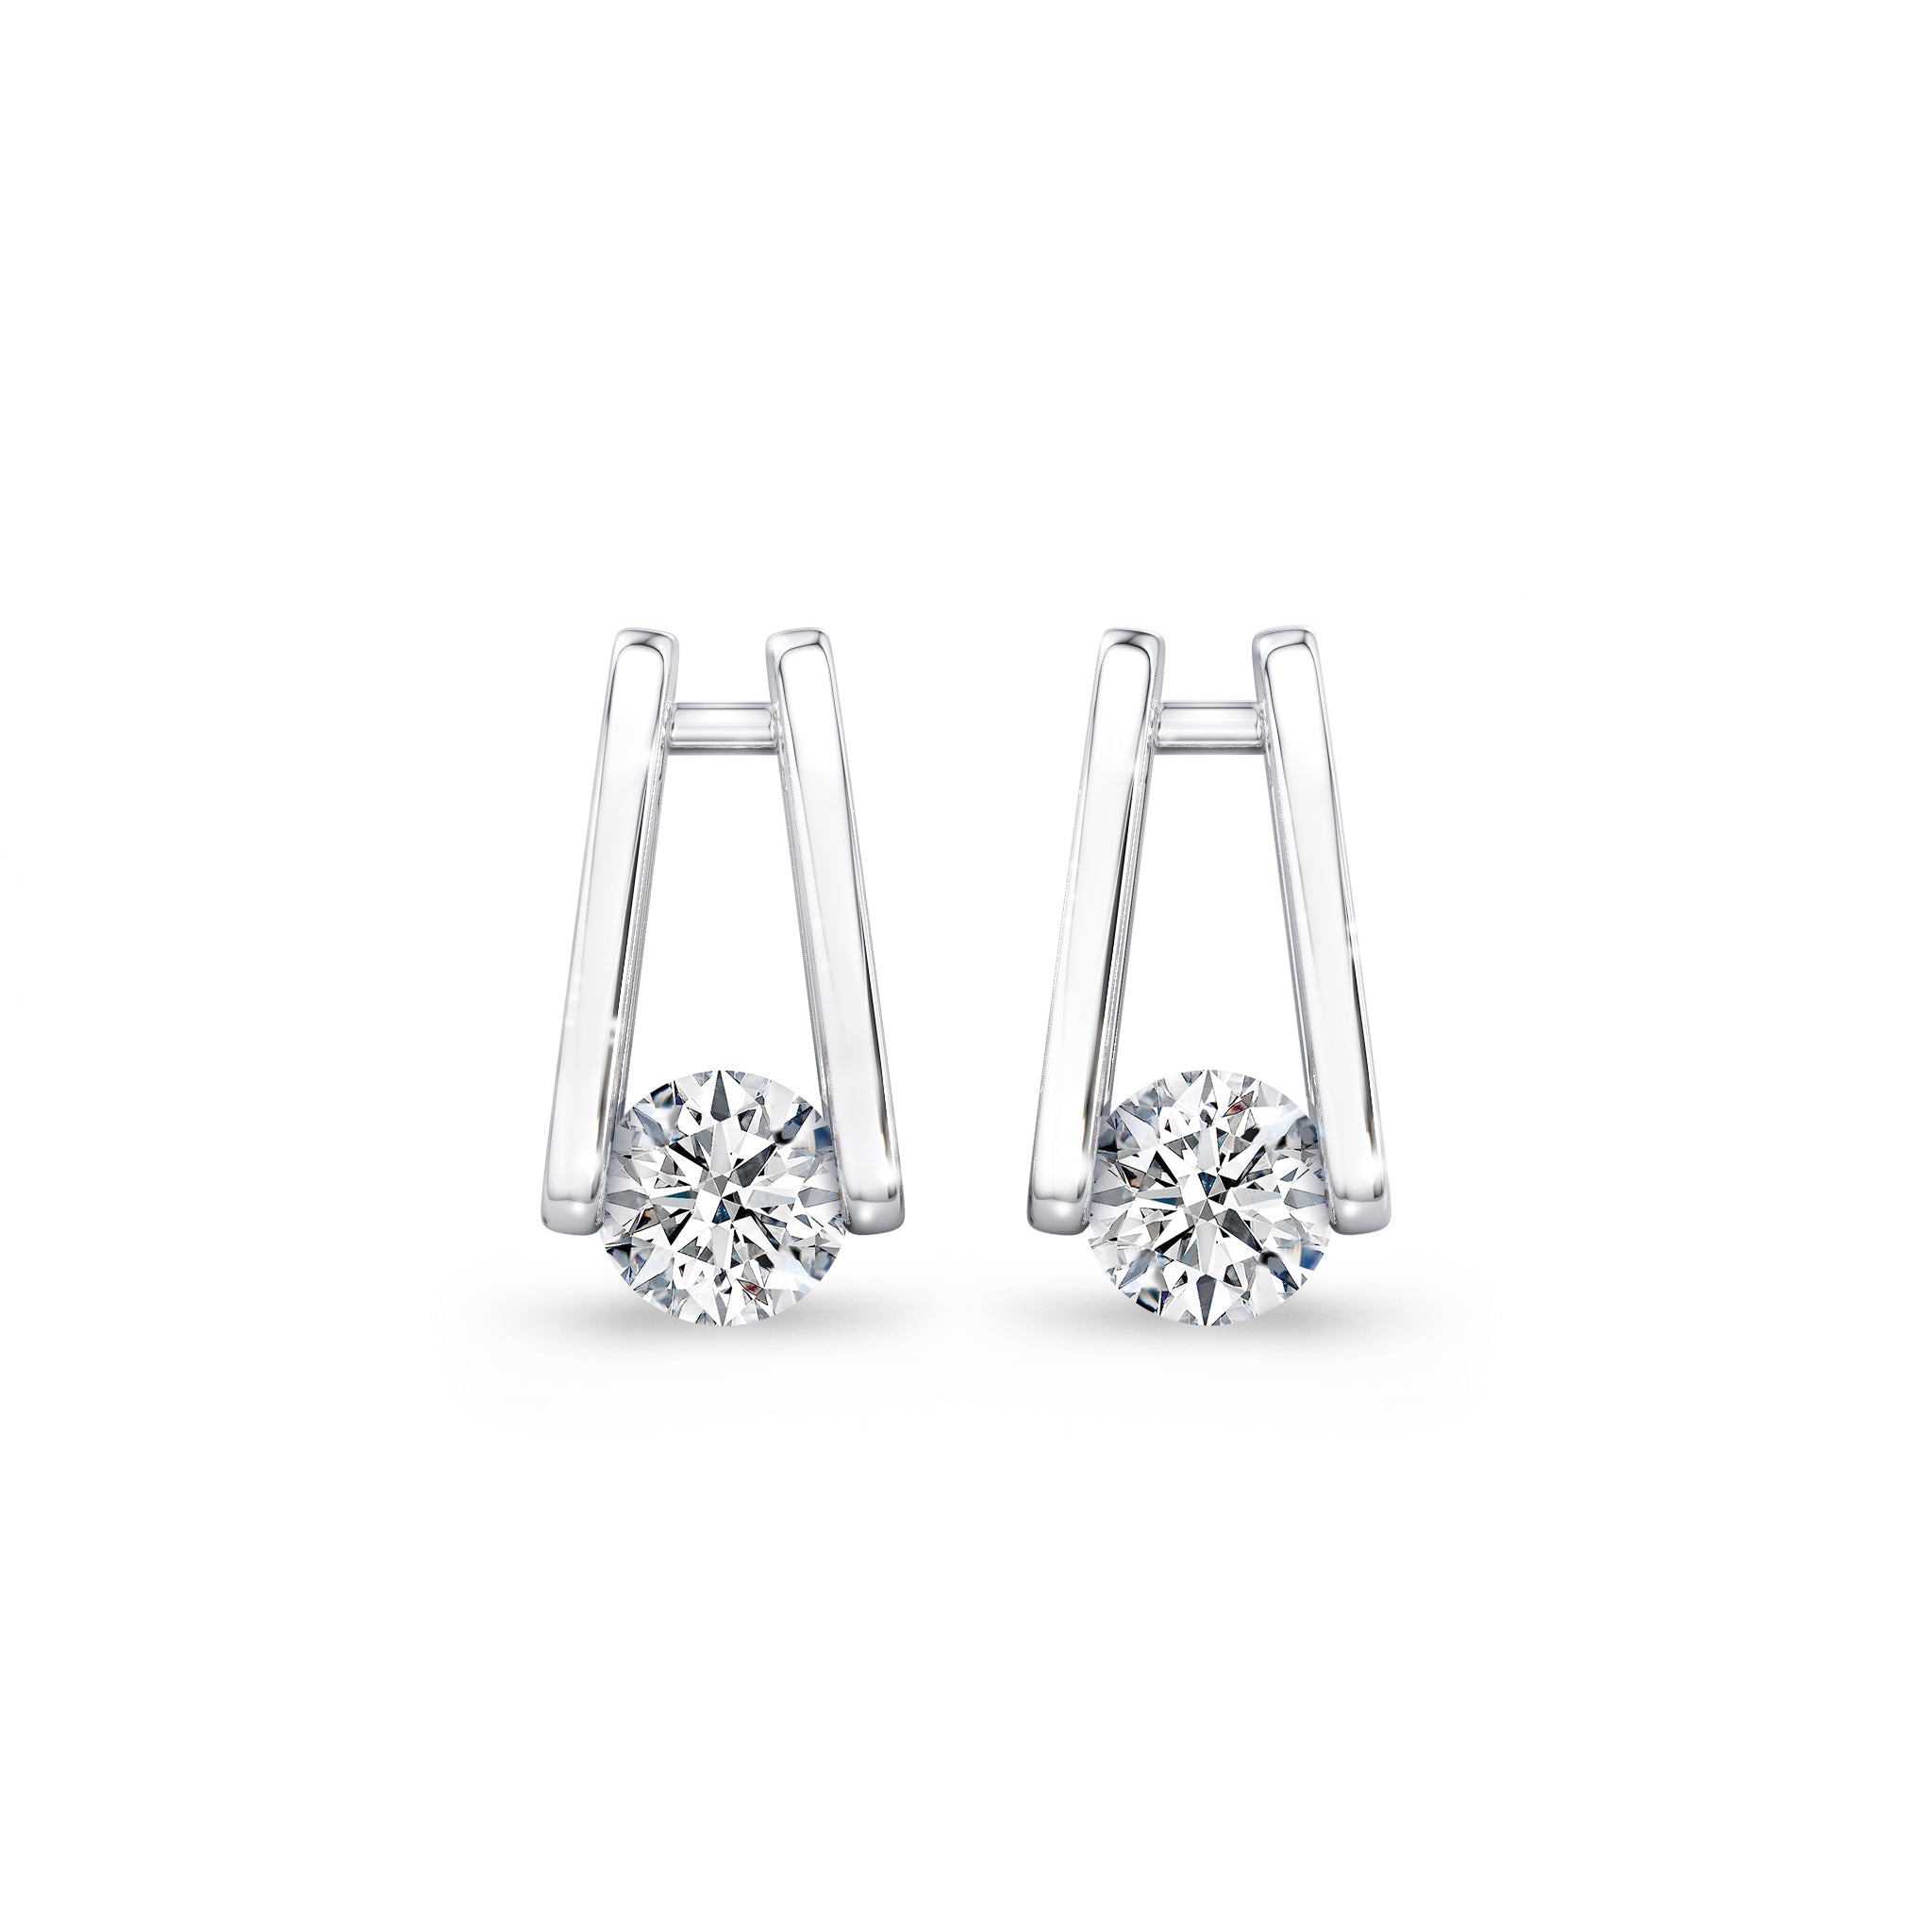 Millennium Classic Diamond Stud Earrings 0.80 Carat in 18K White Gold Front View